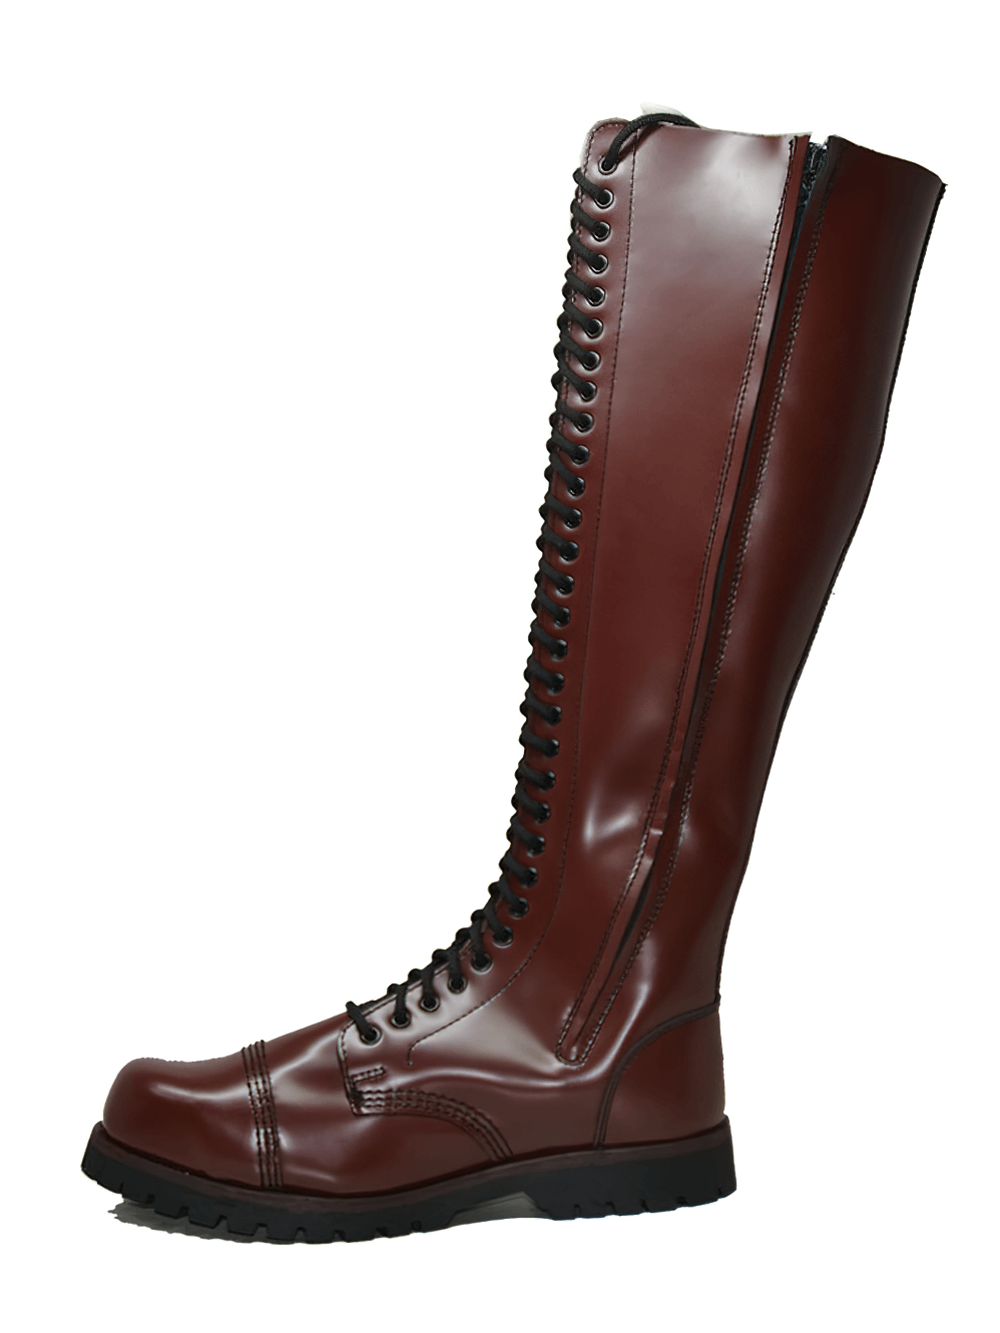 Cherry Leather 30 Eyelets Rangers with Zip Option